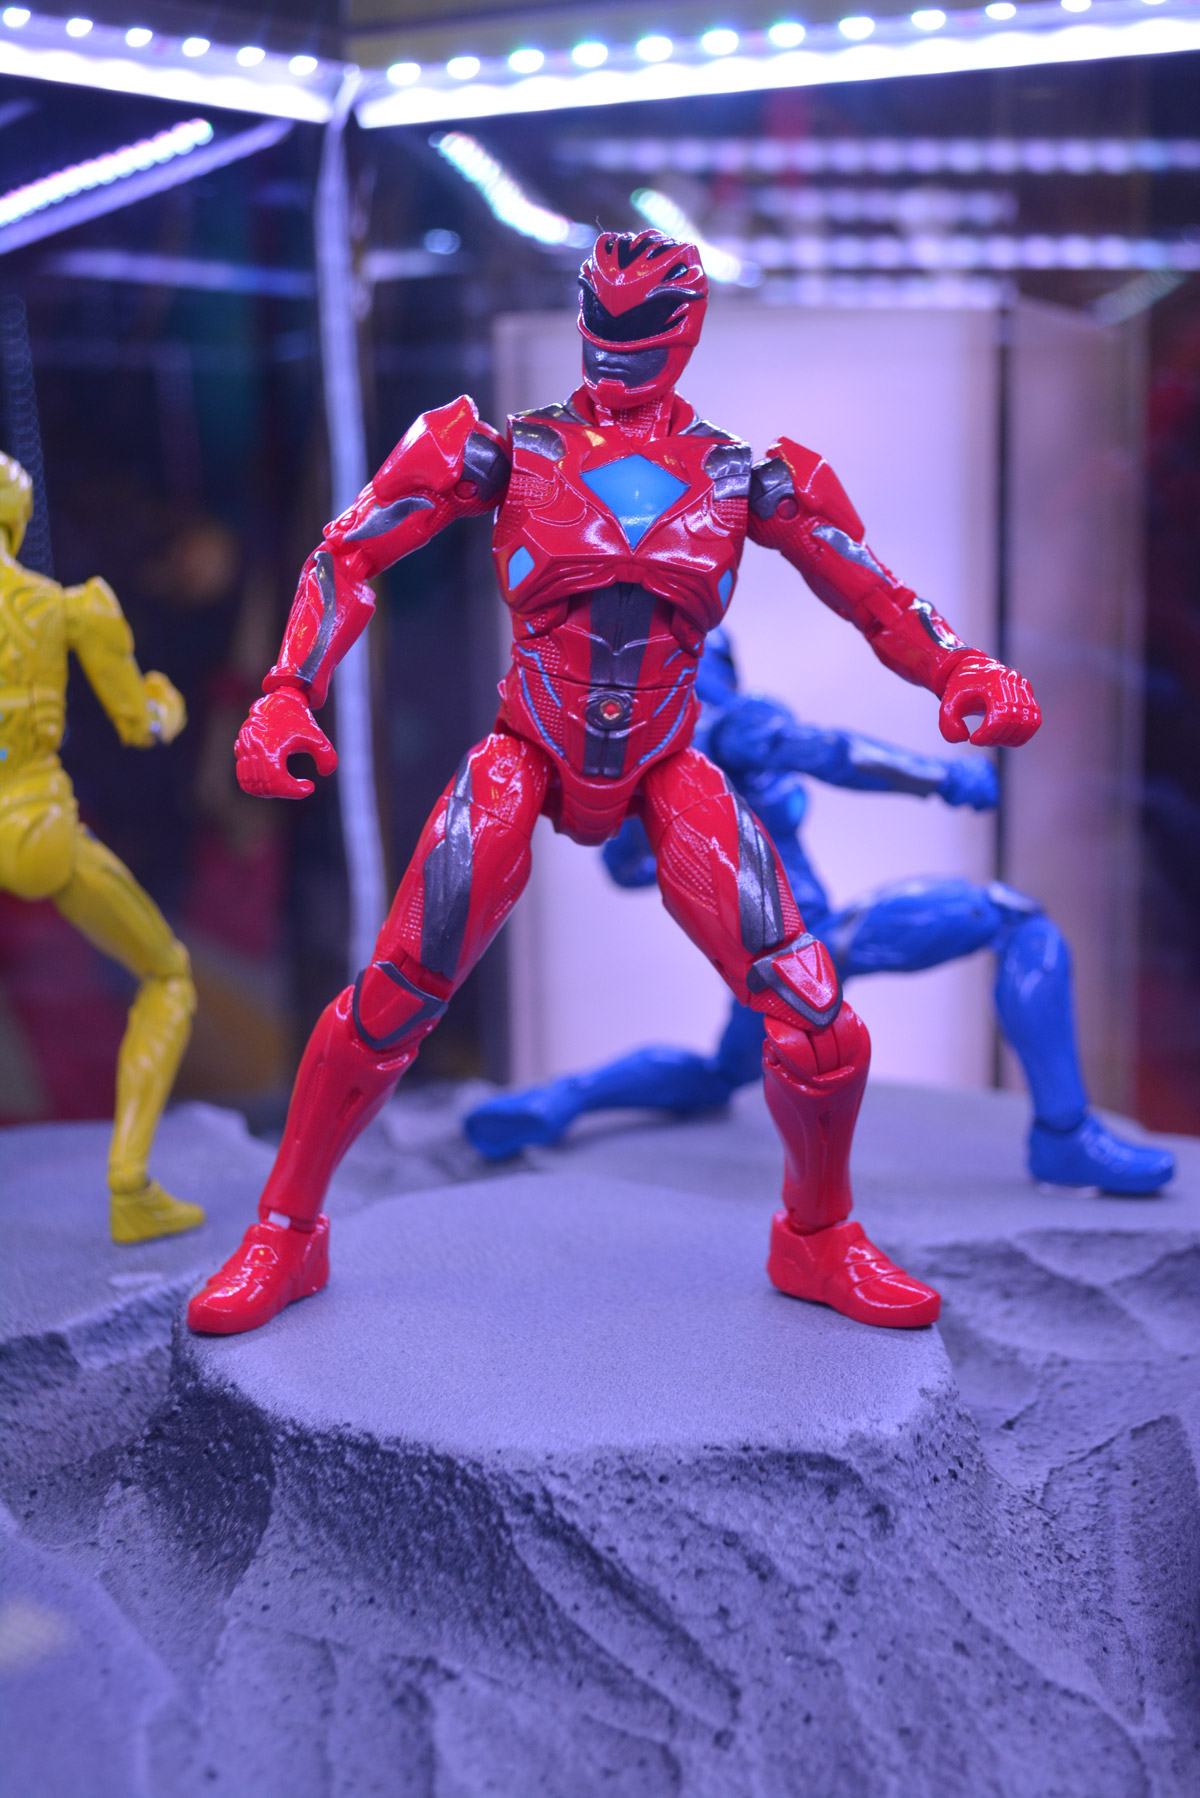 SDCC16: Power Rangers Action Figures Show New Movie Look - Previews World